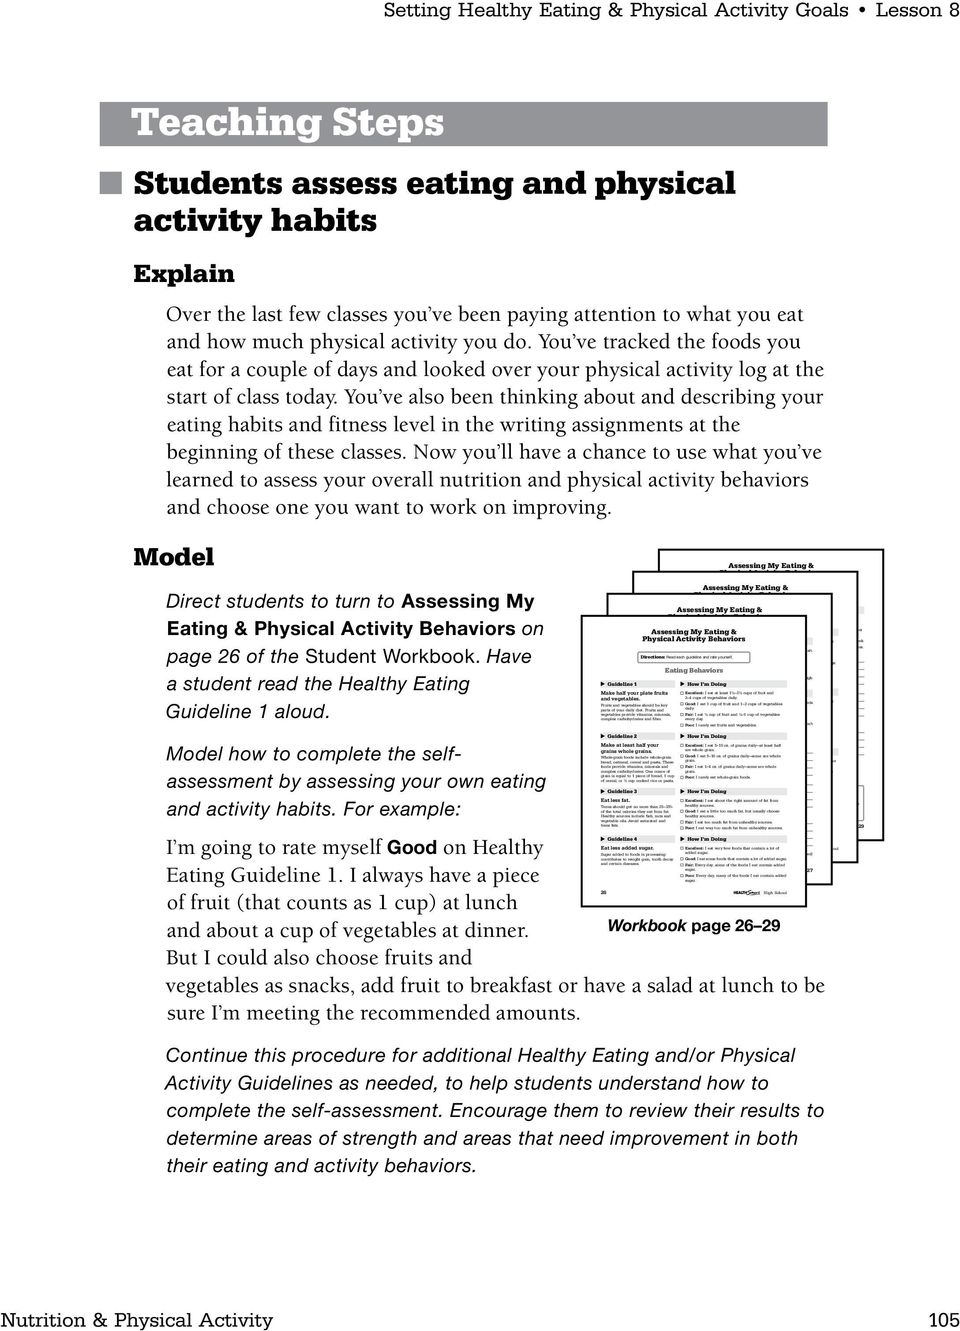 Setting Healthy Eating & Physical Activity Goals Lesson 8 Teaching Steps Students assess eating and physical activity habits Explain Over the last few classes you ve been paying attention to what you